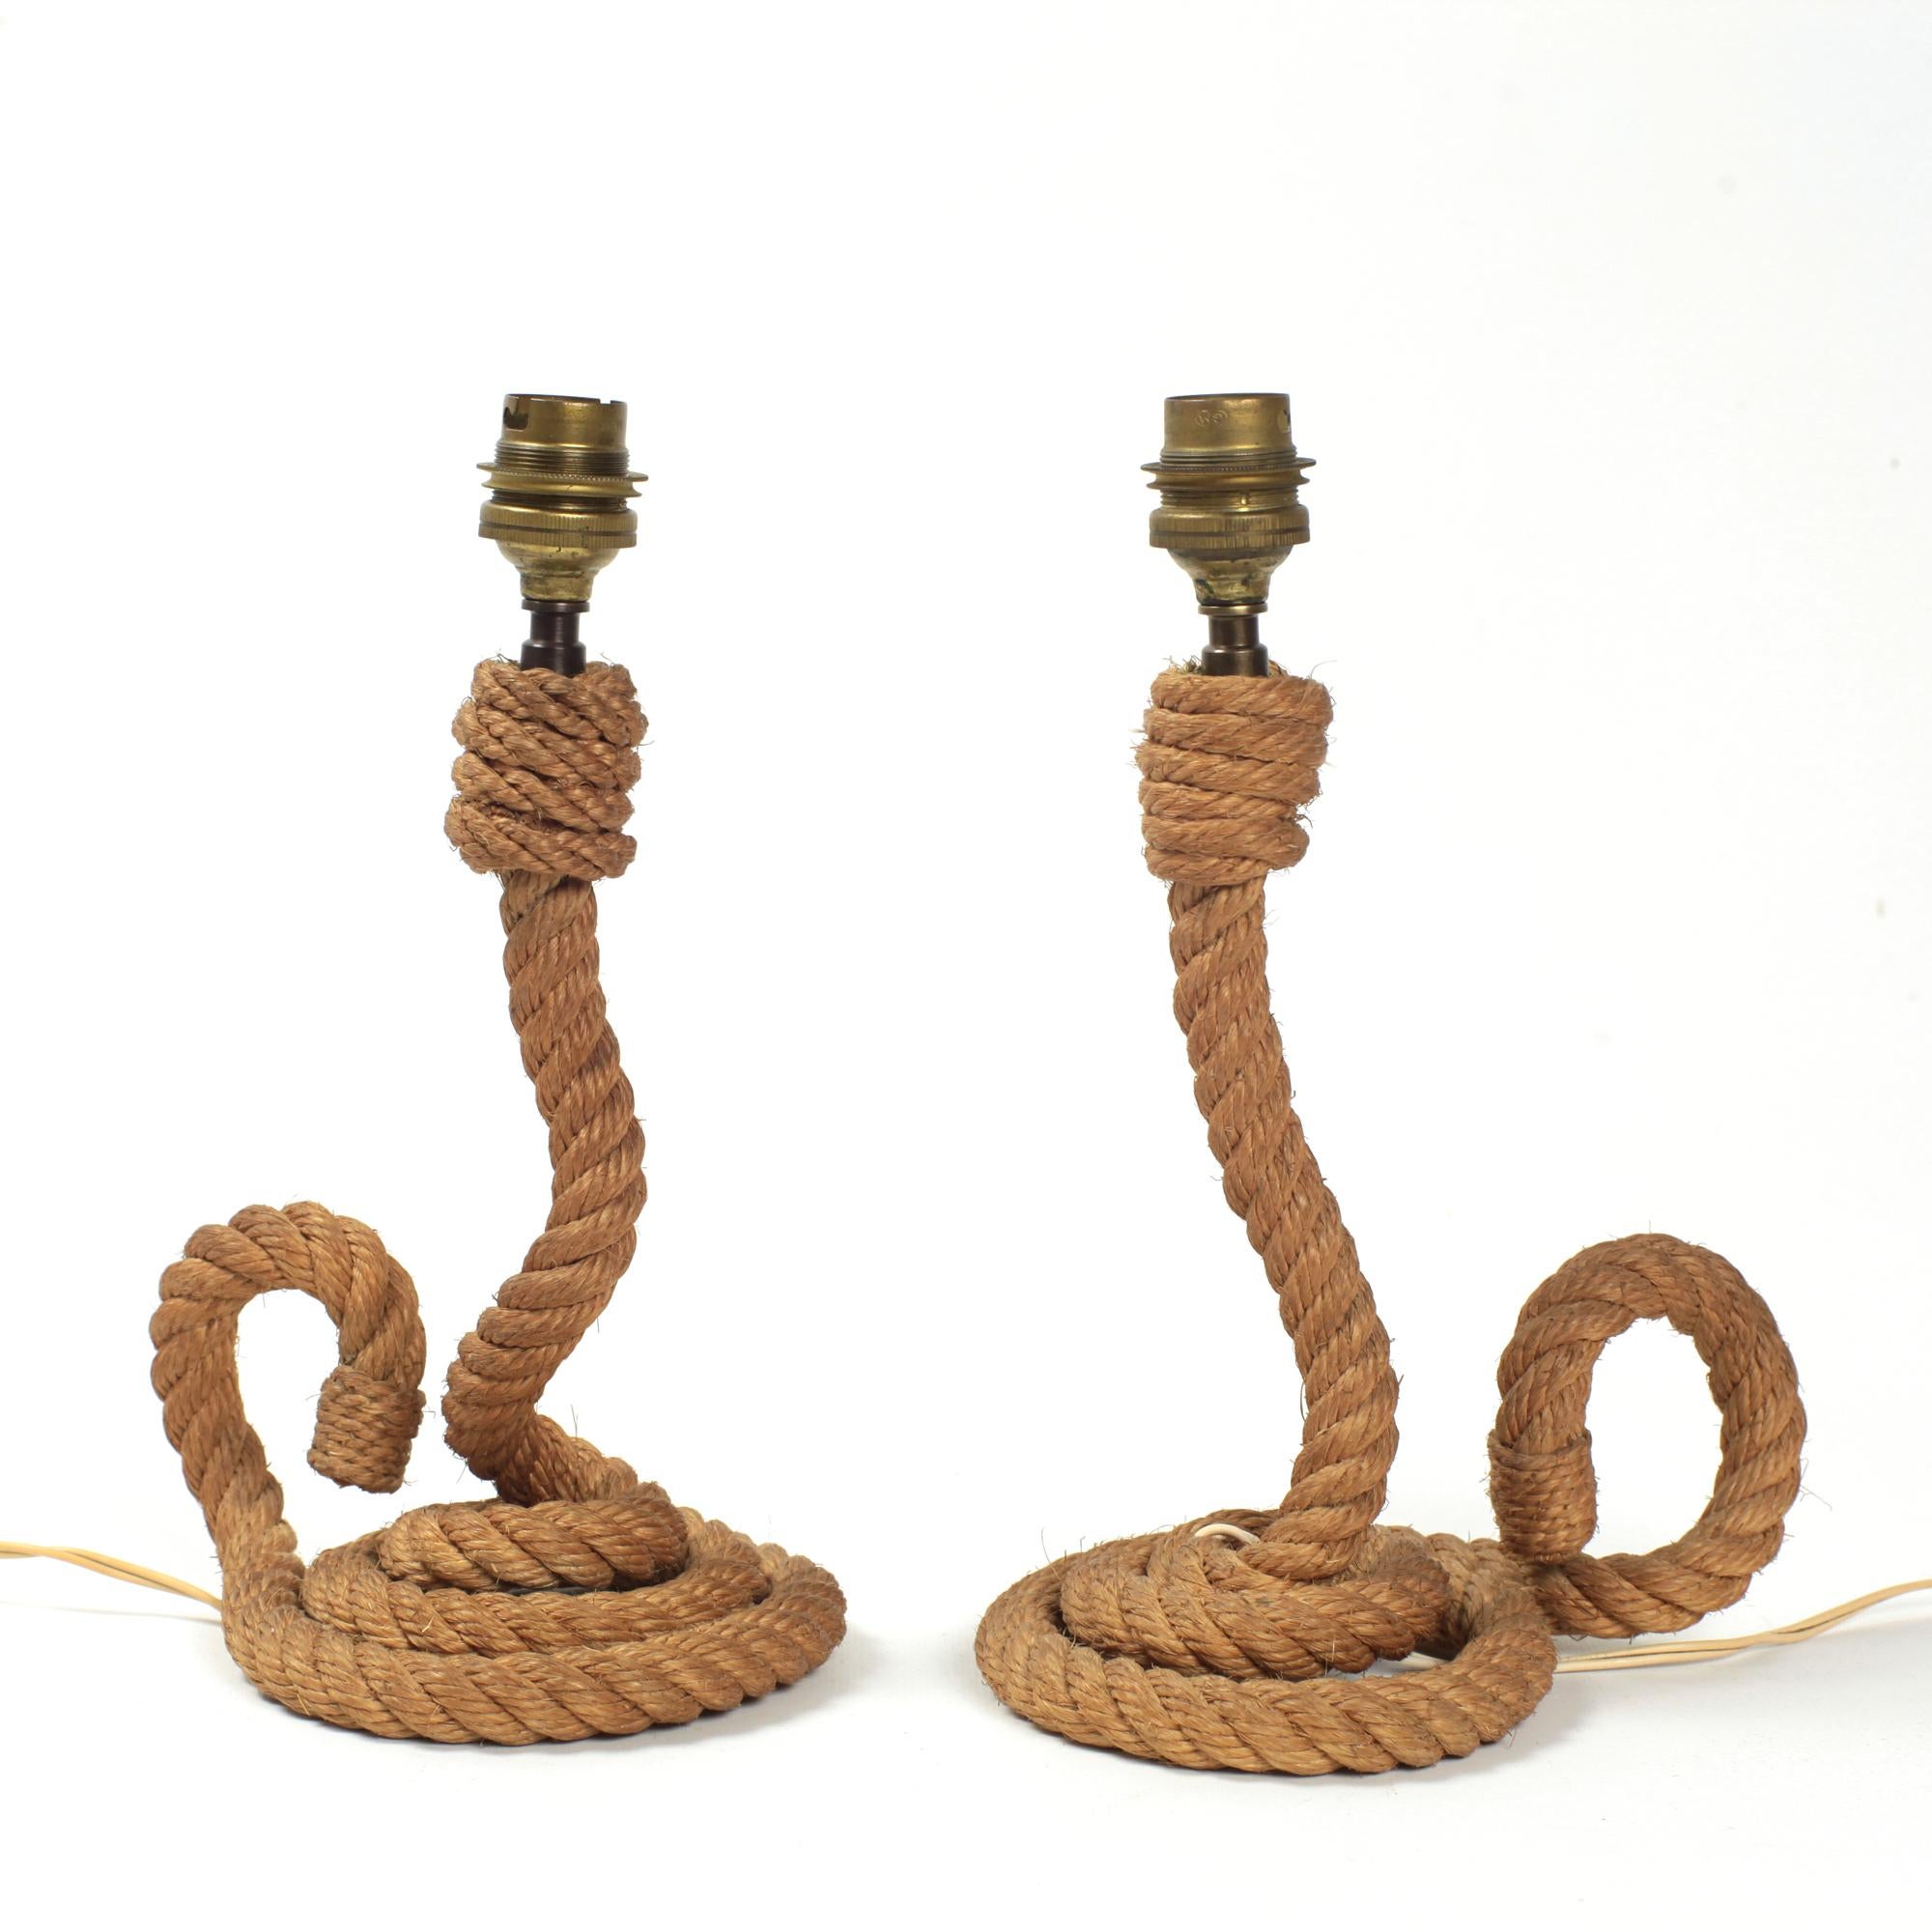 Pair of Audoux-Minet rope table lamp France 1950

Good condition.

Measure: Height 25 cm

B22 socket